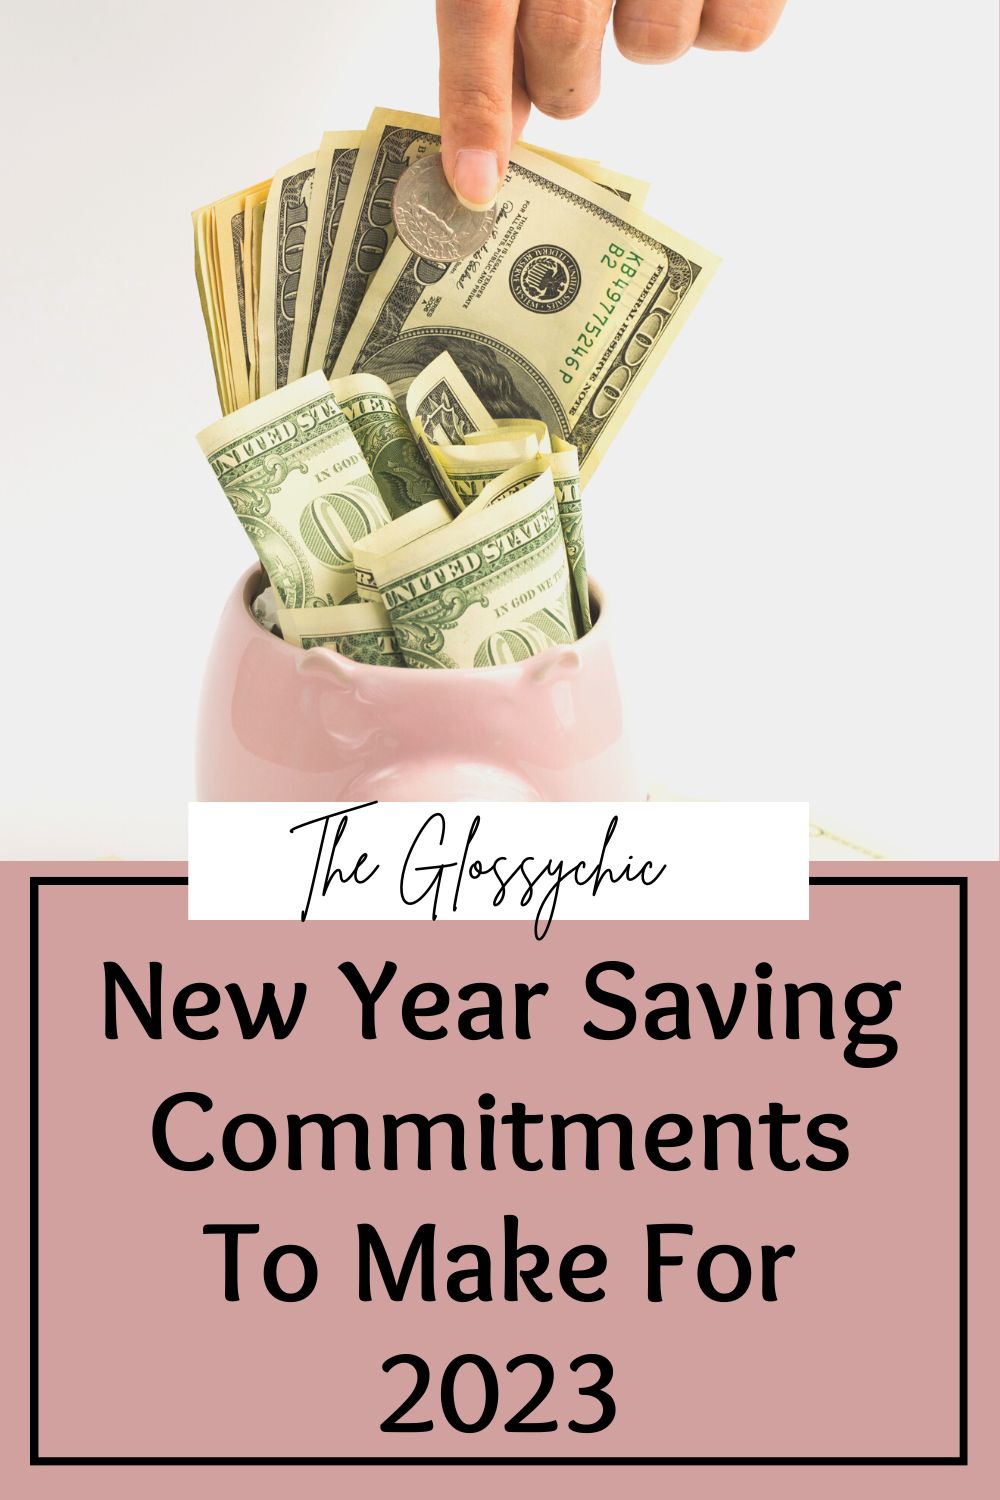 New Year Saving Commitments To Make For 2023